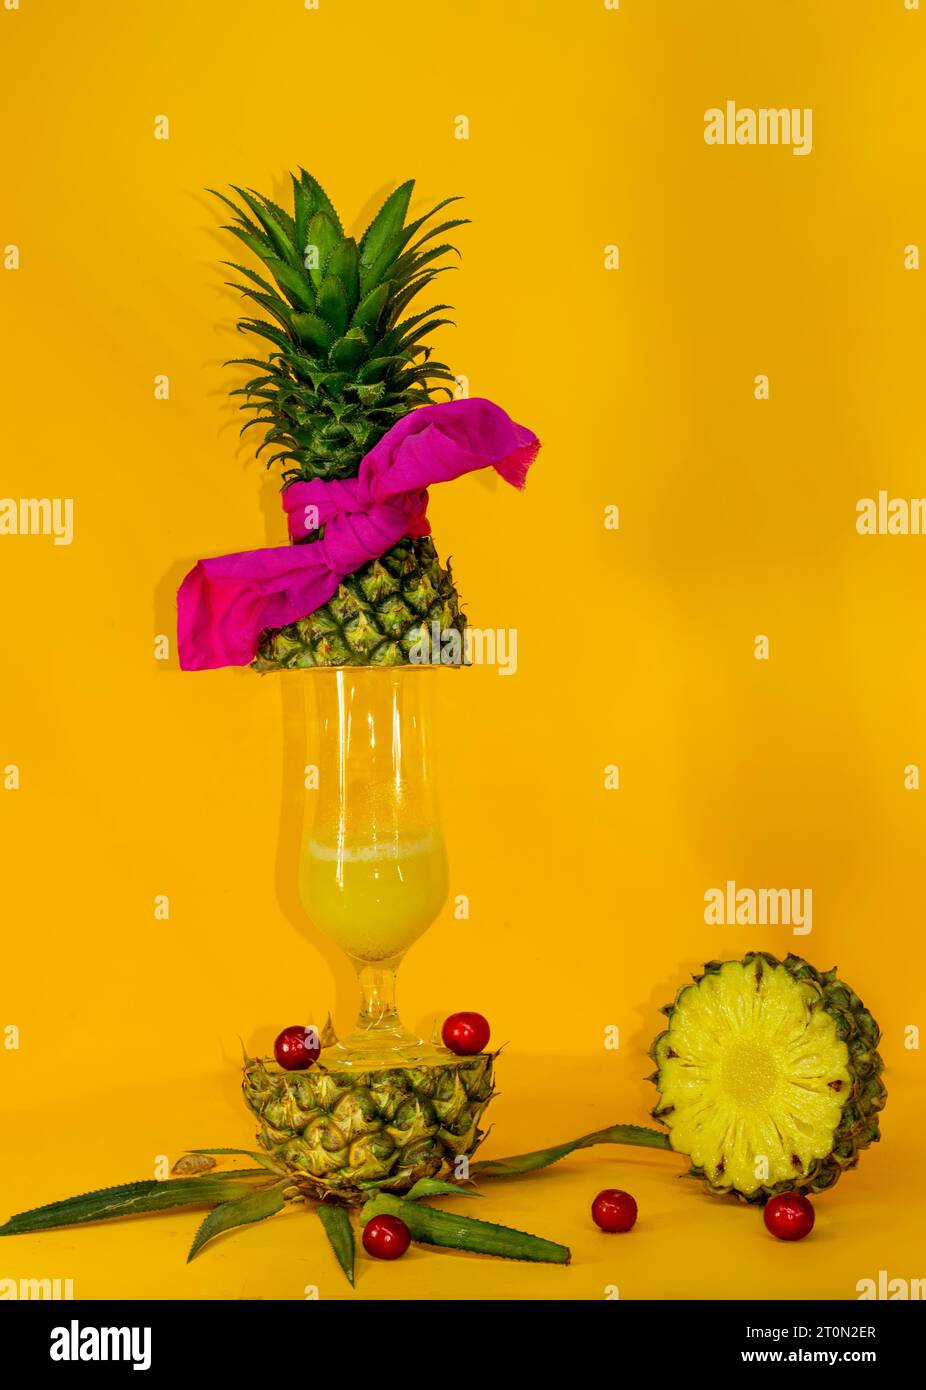 Tropical Dreams: Pineapple Art Photography Delights Stock Photo